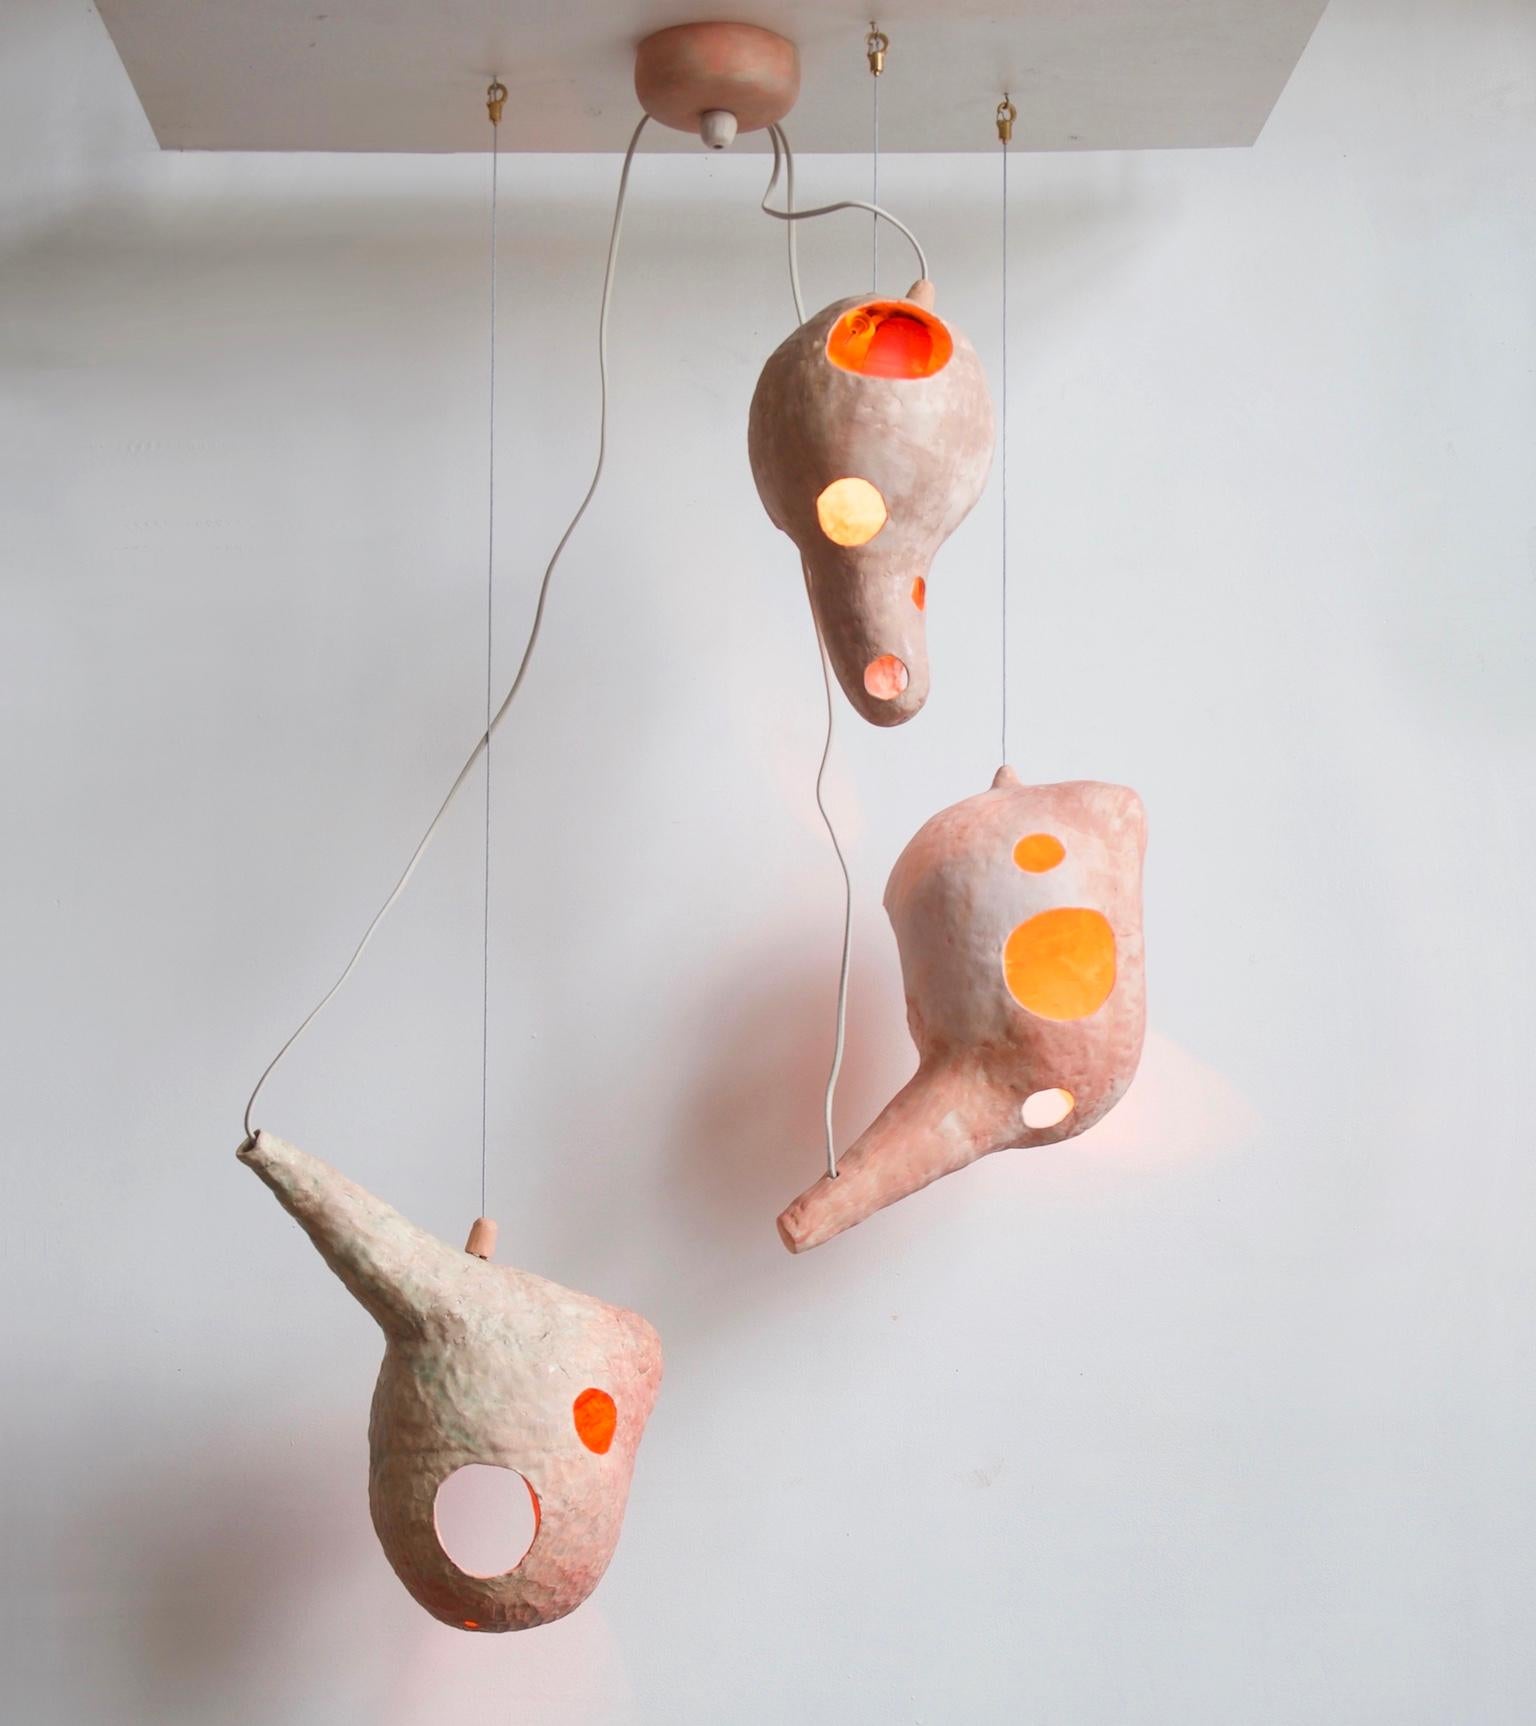 Brah-Voh - Eck-Oh - Foks-Trot is a pendant lamp with three You See a Sheep ceramic shells - Brah-Voh, Eck-Oh and Foks-Trot - installed with a single canopy.

You See a Sheep is a lighting collection that uses hand-built ceramic shells to house the